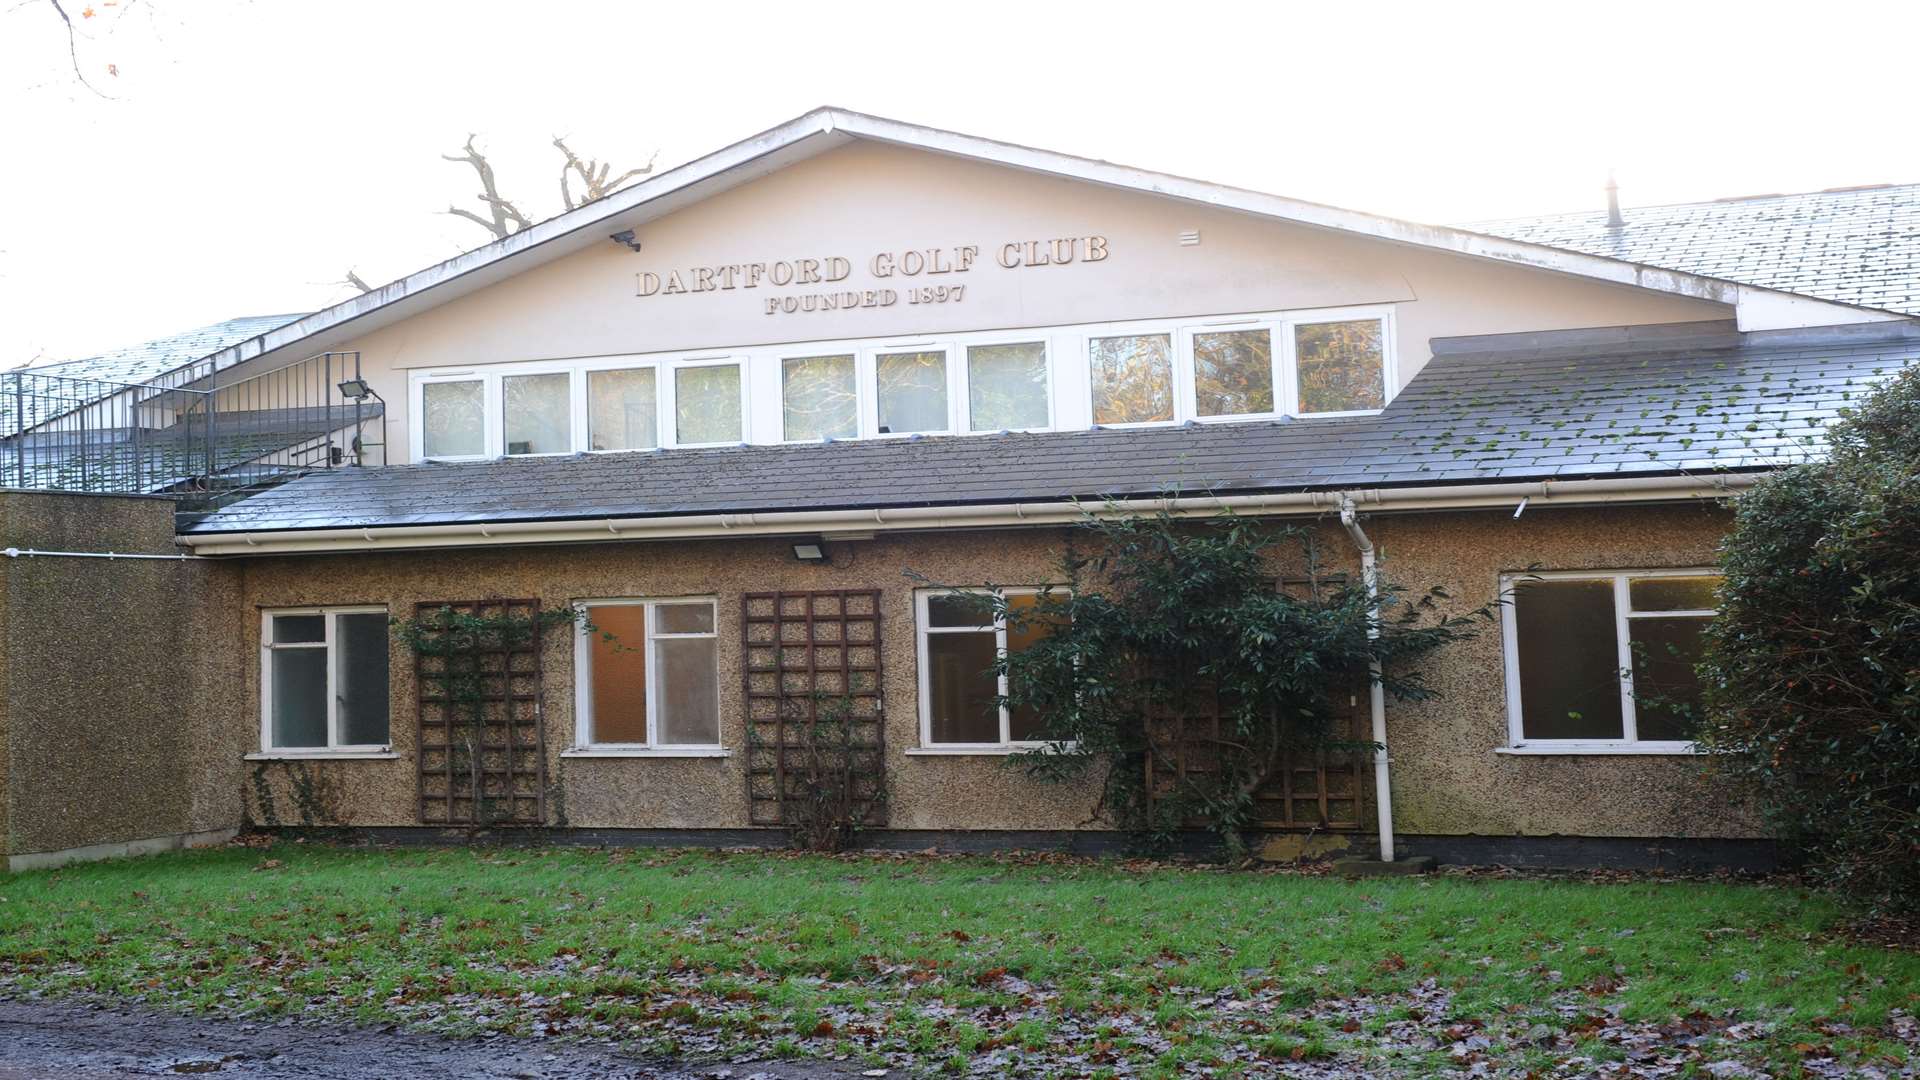 Dartford Golf Club have agreed not shoot any more foxes pending a review by the board of directors early next year.